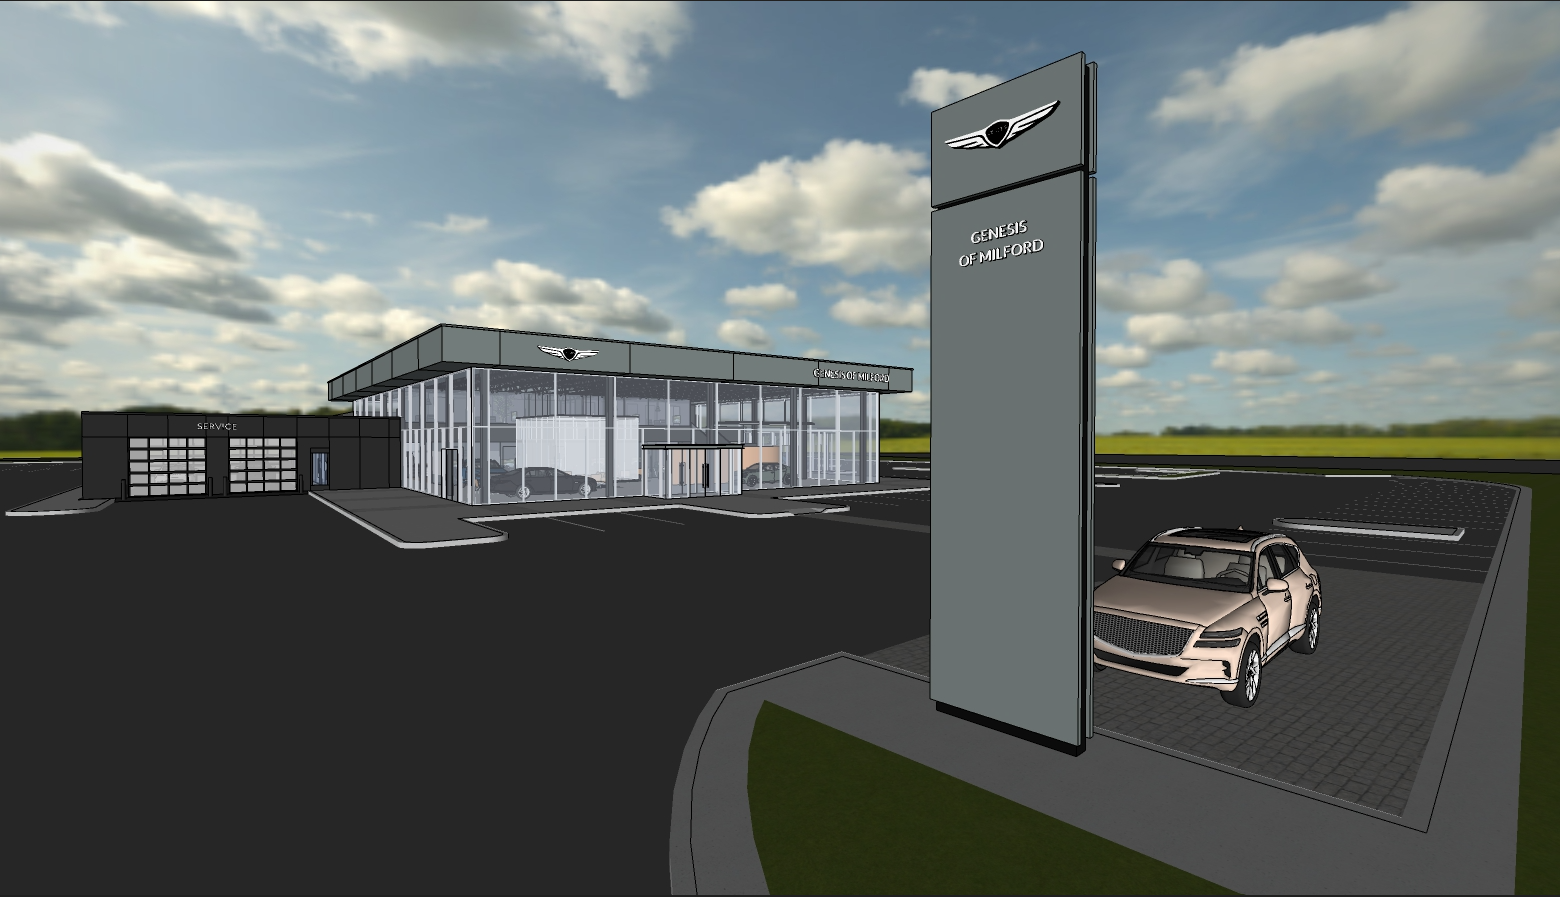 Genesis auto dealership to open at former Howard Johnson in Milford - Milford Mirror